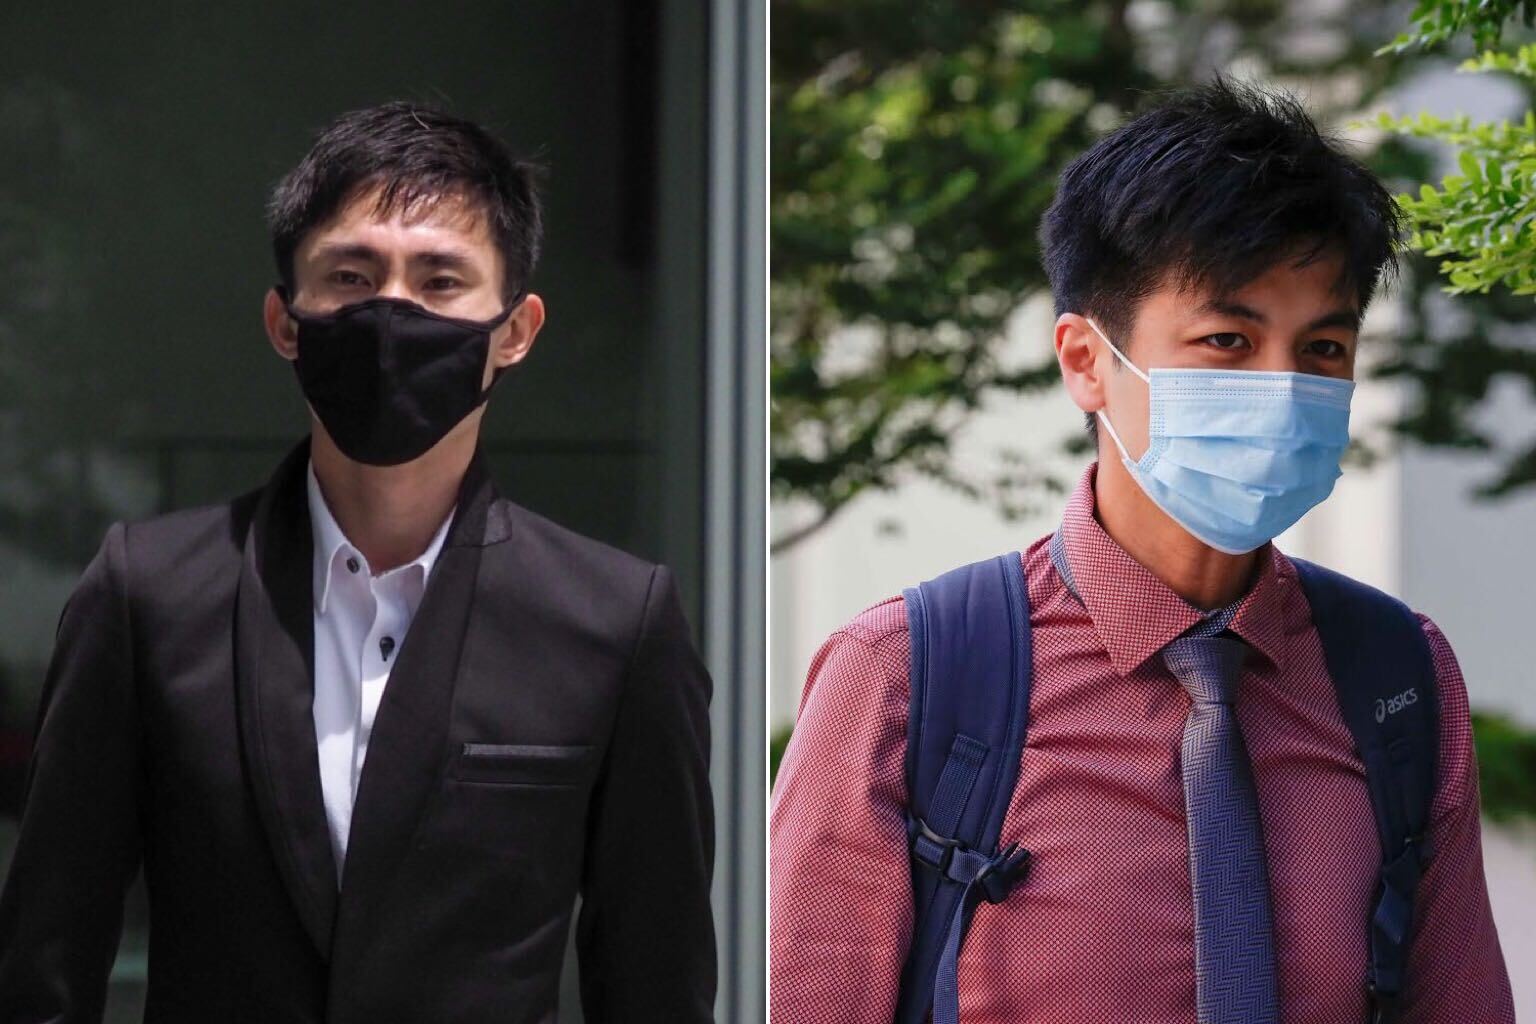 Marathoner Ashley Liew wins defamation suit against teammate Soh Rui Yong, who has to pay S$180,000 in damages